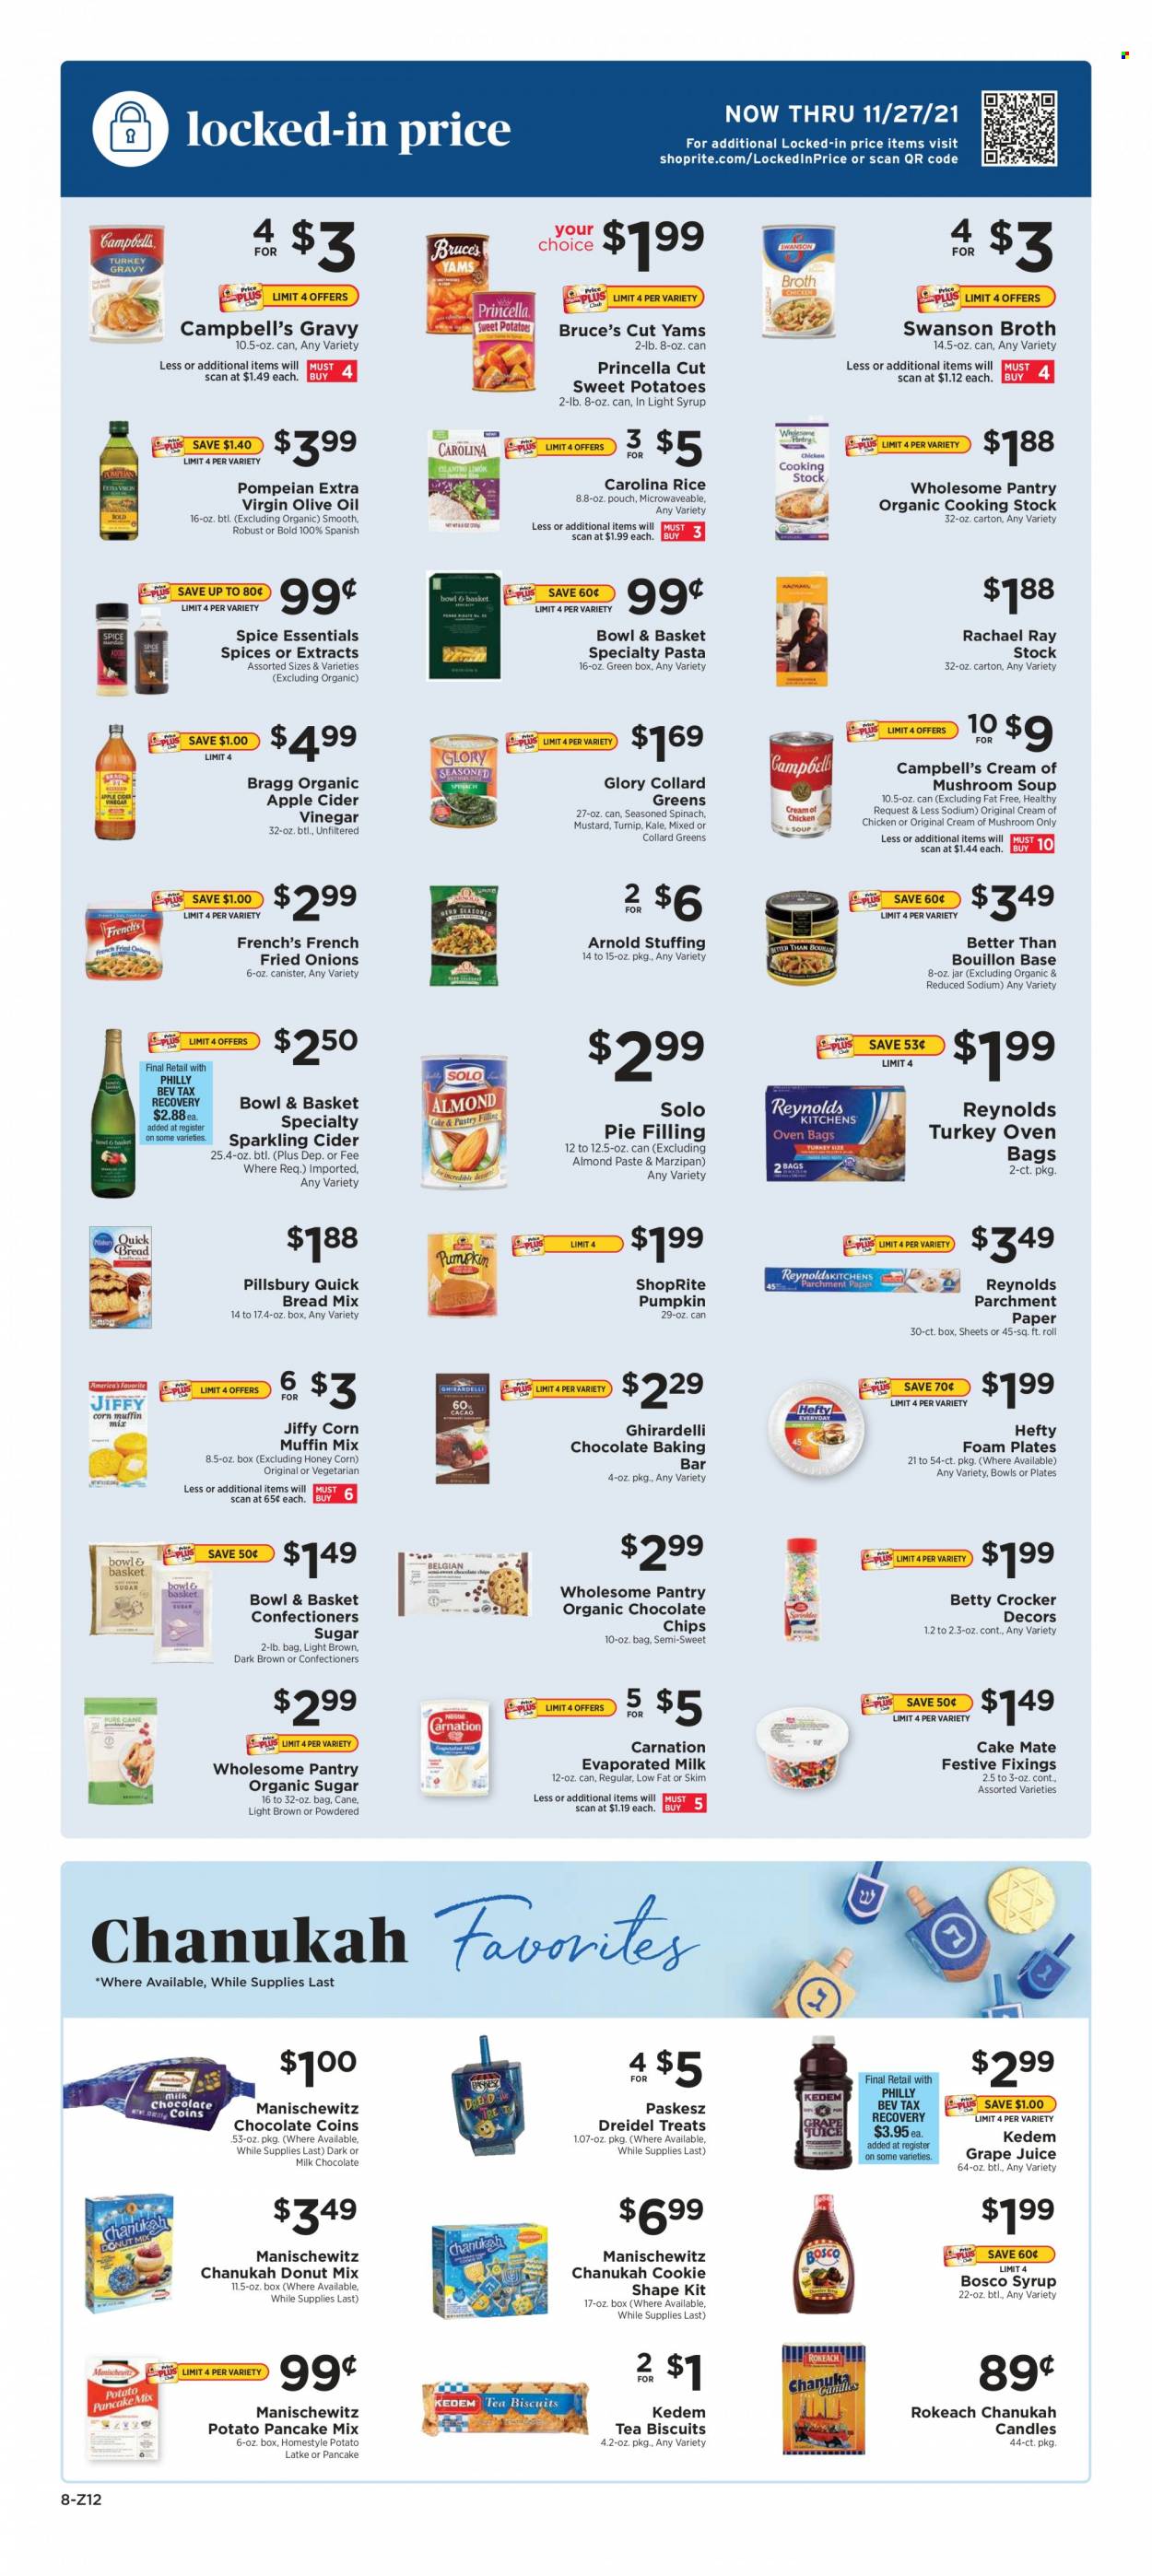 thumbnail - ShopRite Flyer - 11/14/2021 - 11/20/2021 - Sales products - bread, cake, Bowl & Basket, donut, corn, collard greens, sweet potato, kale, potatoes, pumpkin, Campbell's, mushroom soup, soup, pasta, pancakes, Pillsbury, evaporated milk, milk chocolate, biscuit, Ghirardelli, bouillon, marzipan, sugar, pie filling, icing sugar, broth, rice, spice, almond paste, mustard, apple cider vinegar, extra virgin olive oil, olive oil, oil, honey, syrup, juice, Kedem, sparkling cider, sparkling wine, Hefty, plate, paper, candle, foam plates. Page 7.